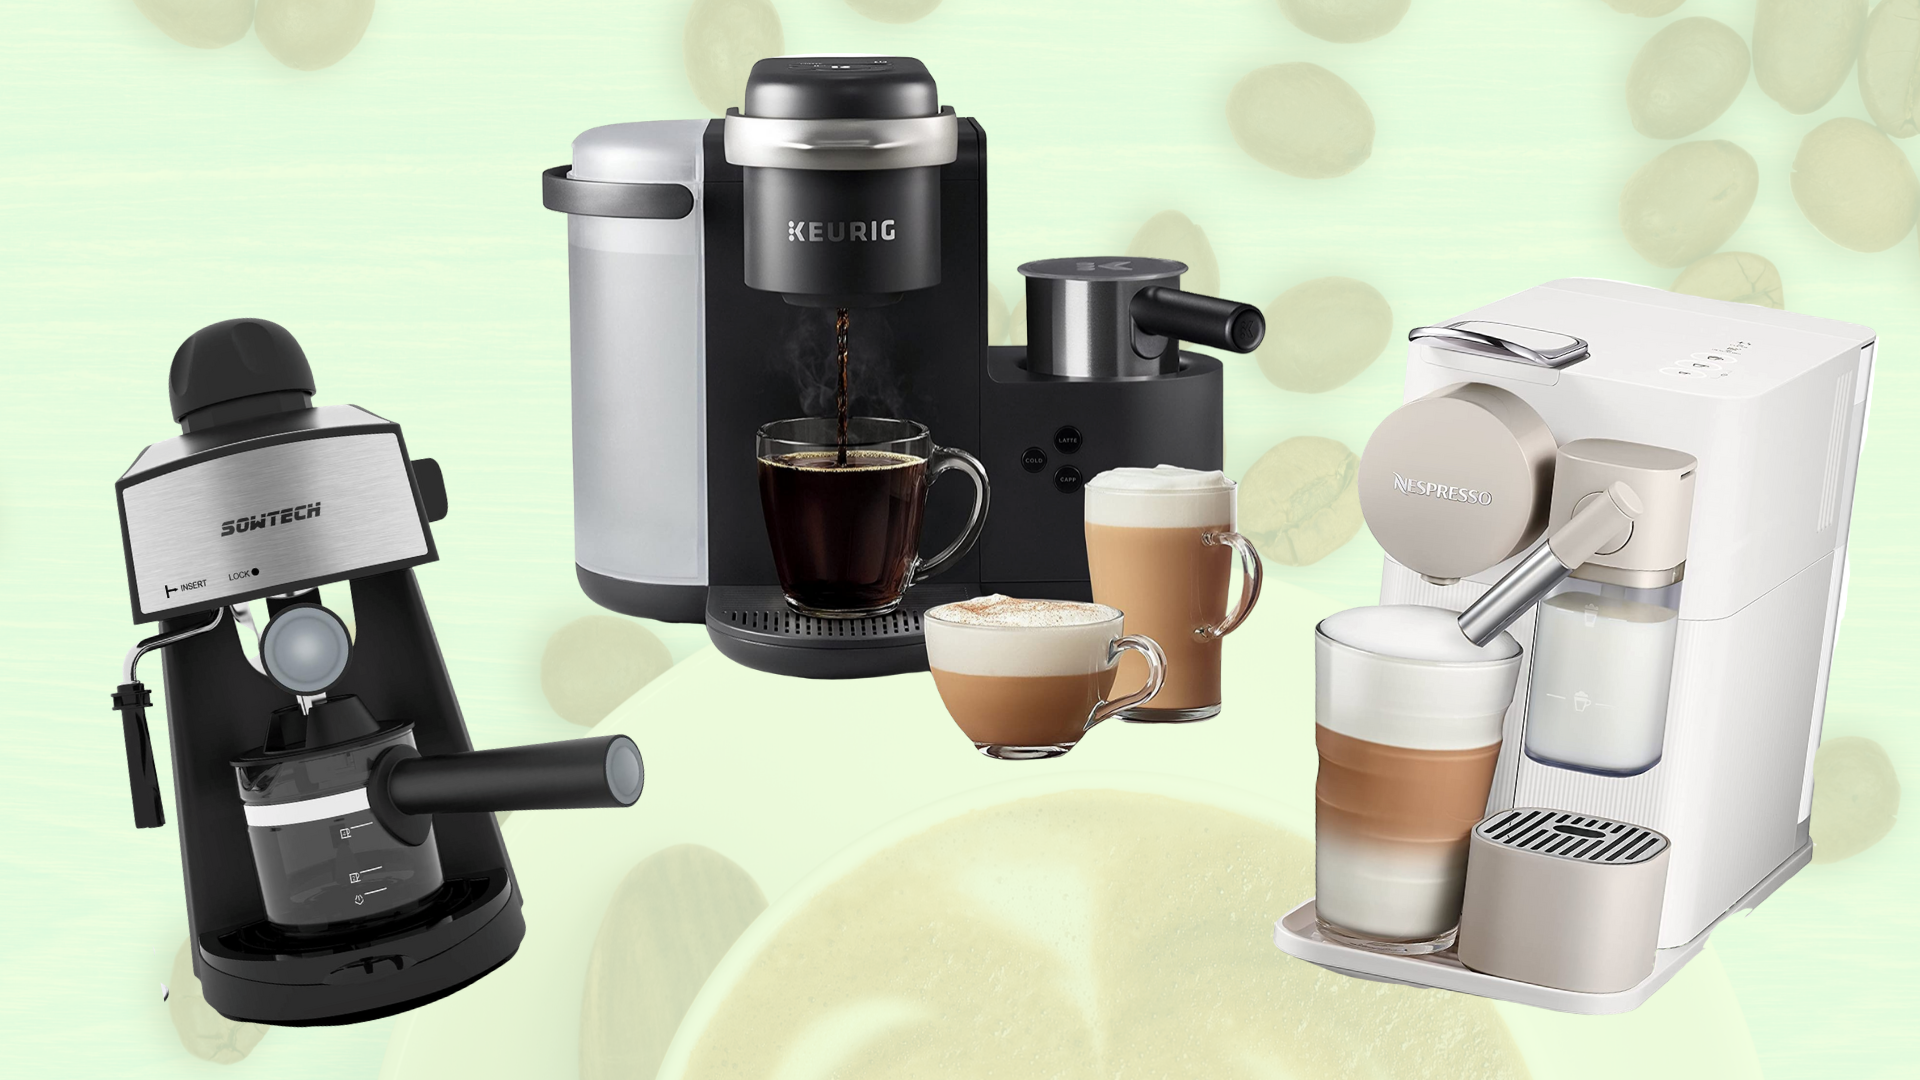 Want a way to make lattes at home? We tried the Nespresso Lattissima to see  if it's up to the job